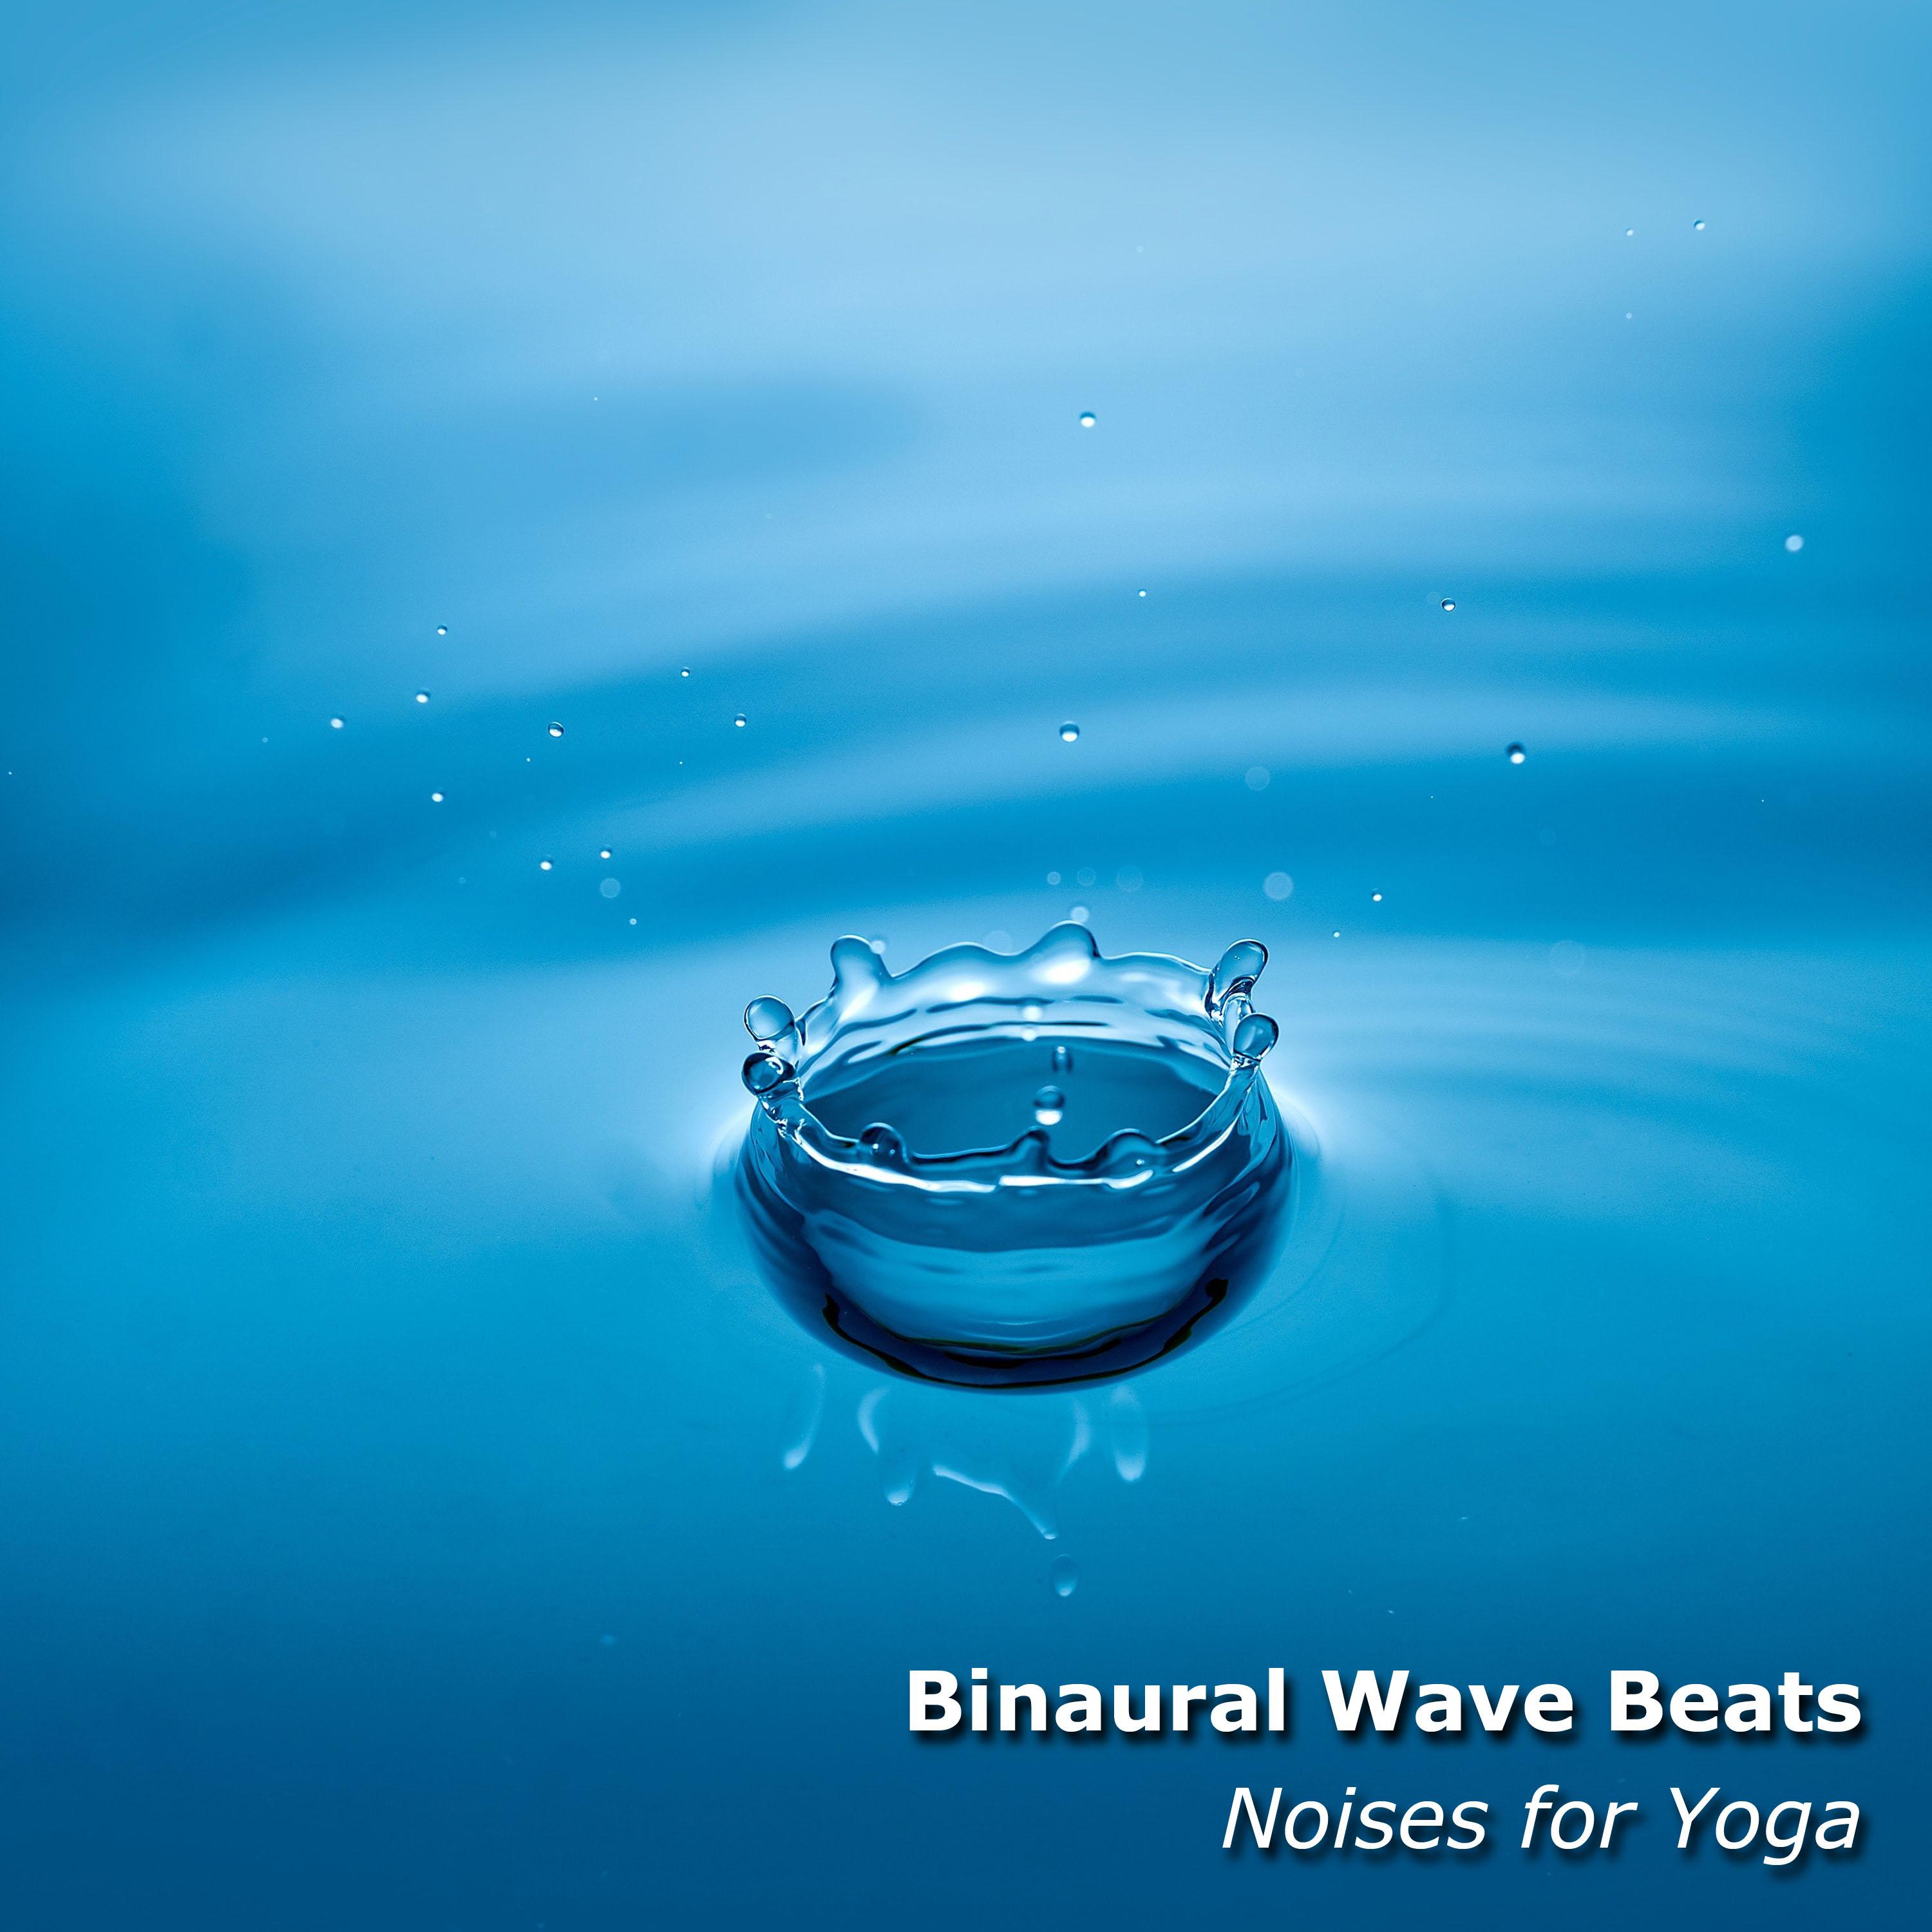 12 Binaural Wave Beats: White and Pink Noises for Yoga Meditation